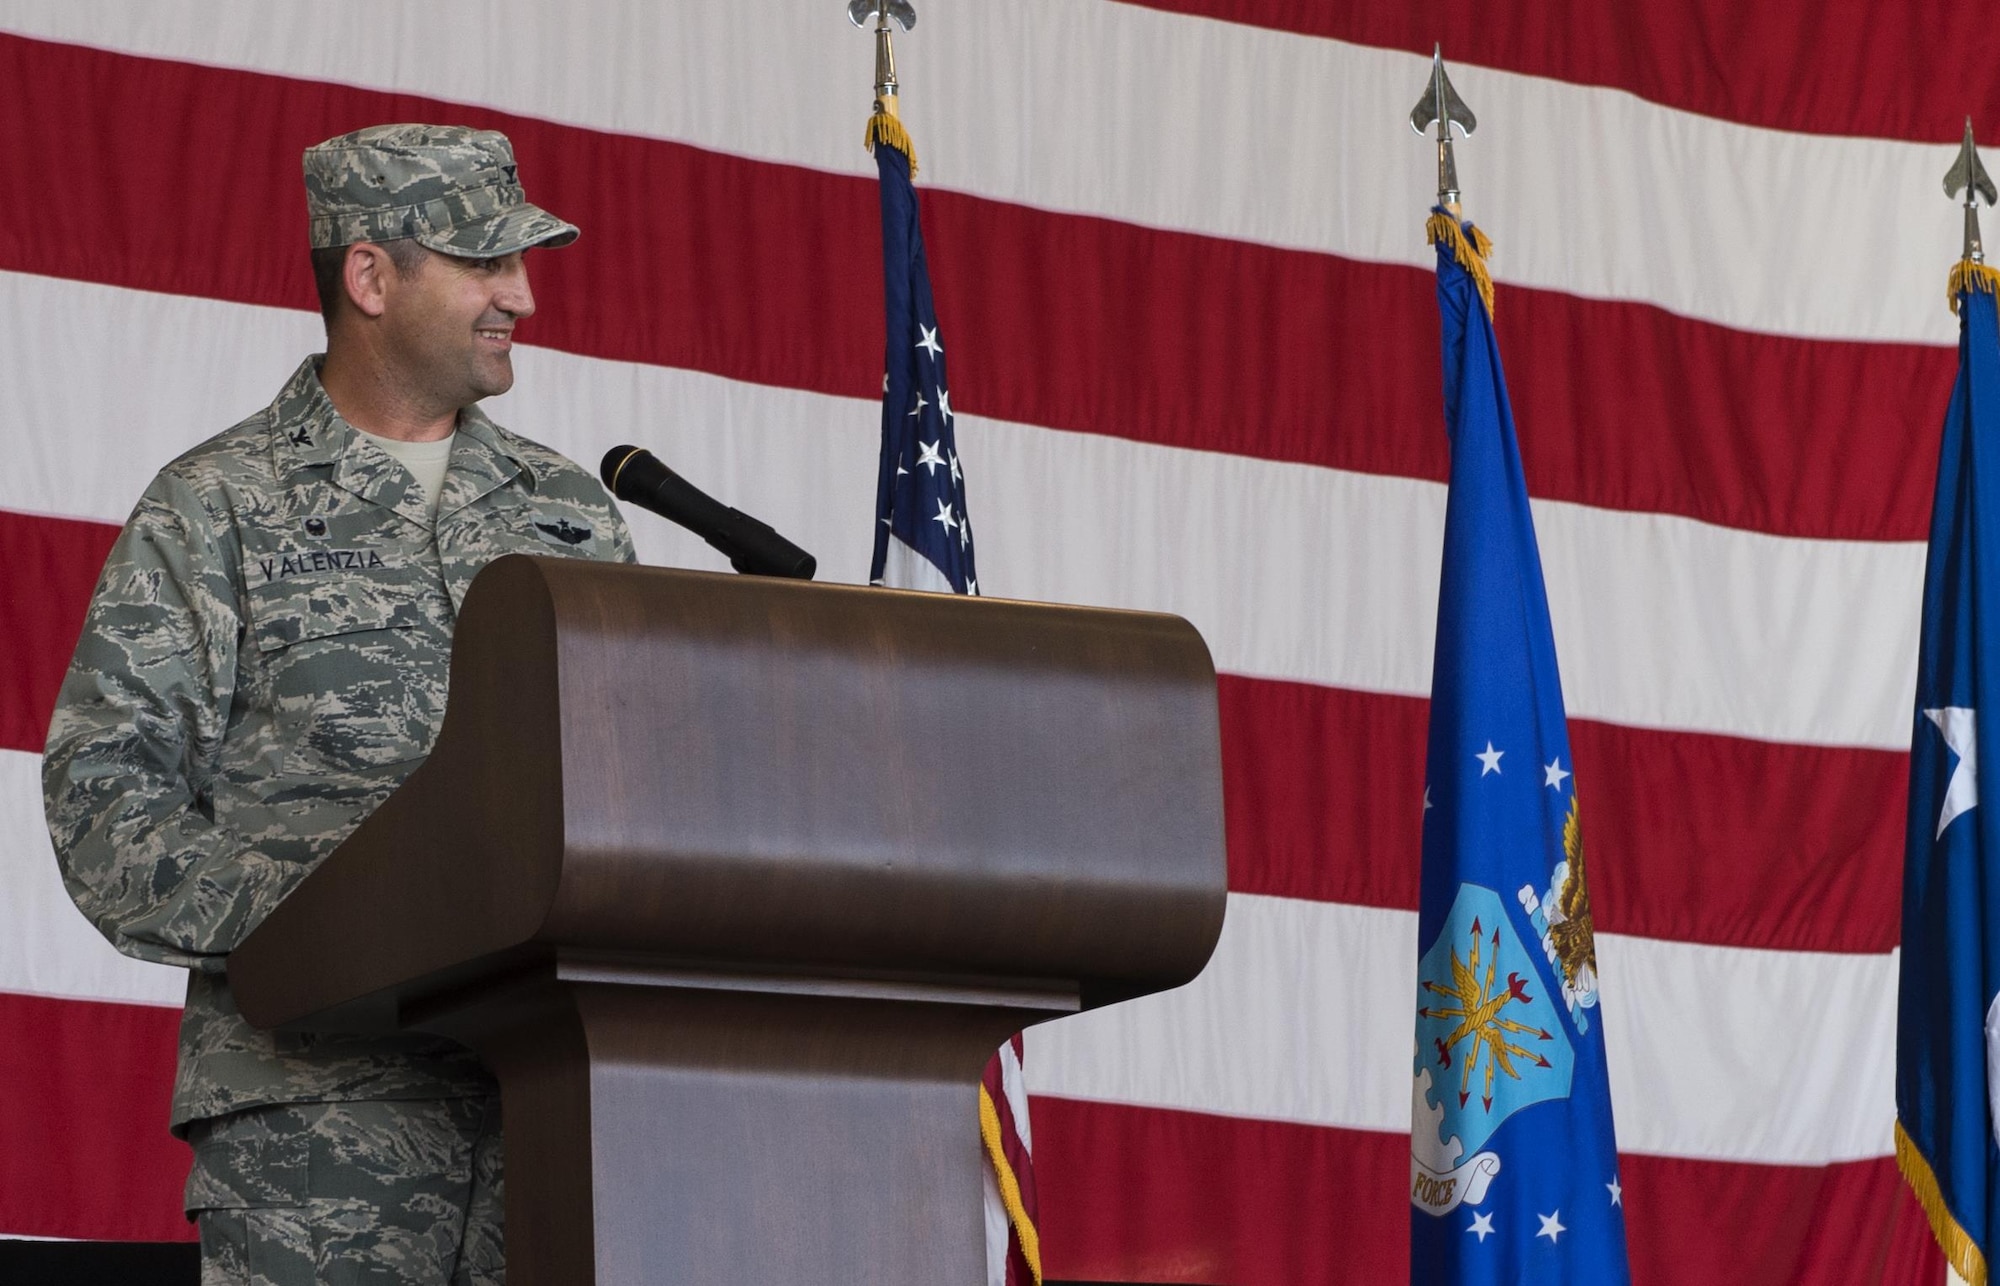 U.S. Air Force Col. Jeffery Valenzia gives remarks during a change of command ceremony, June 28, 2016, at Moody Air Force Base, Ga. The 93d Air Ground Operations Wing consists of three groups with more than 2,800 battlefield Airmen at 20 locations throughout the continental U.S. (U.S. Air Force photo by Airman 1st Class Janiqua P. Robinson/Released)